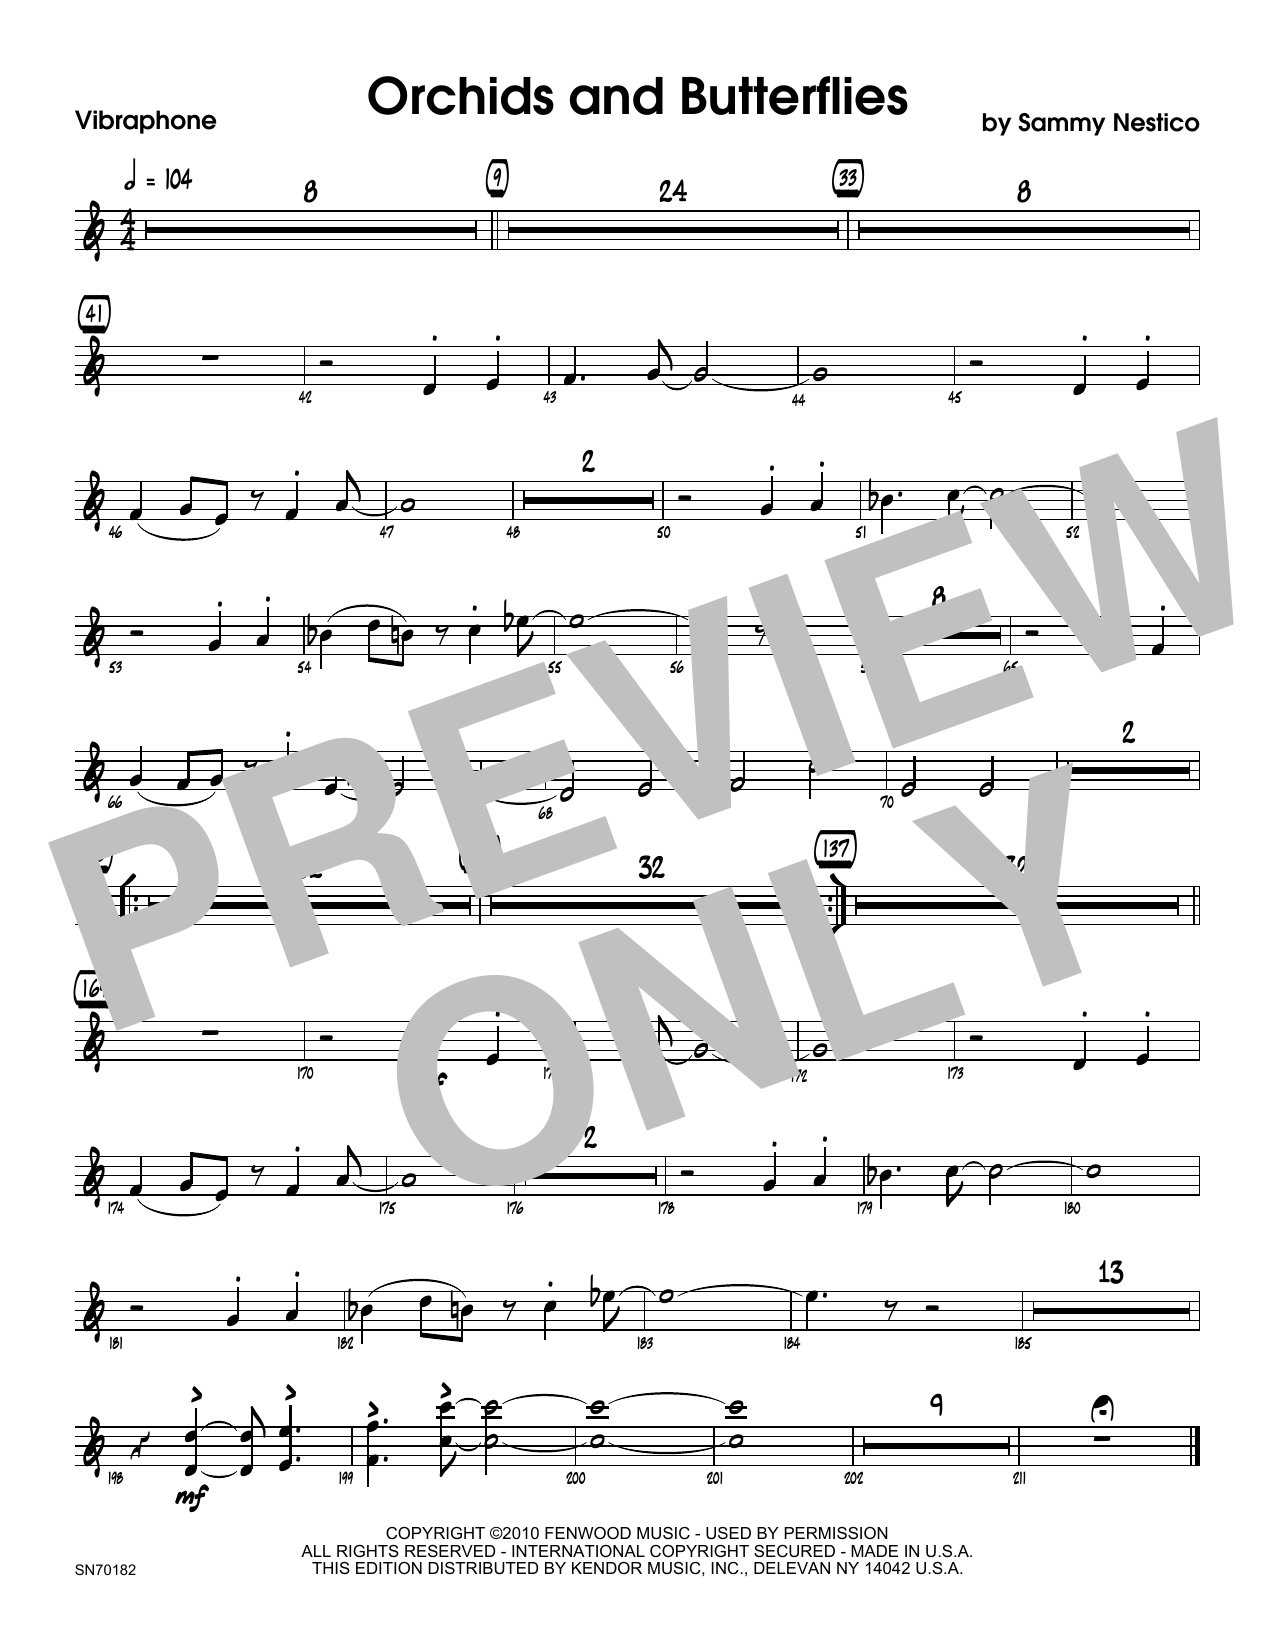 Download Sammy Nestico Orchids And Butterflies - Vibes Sheet Music